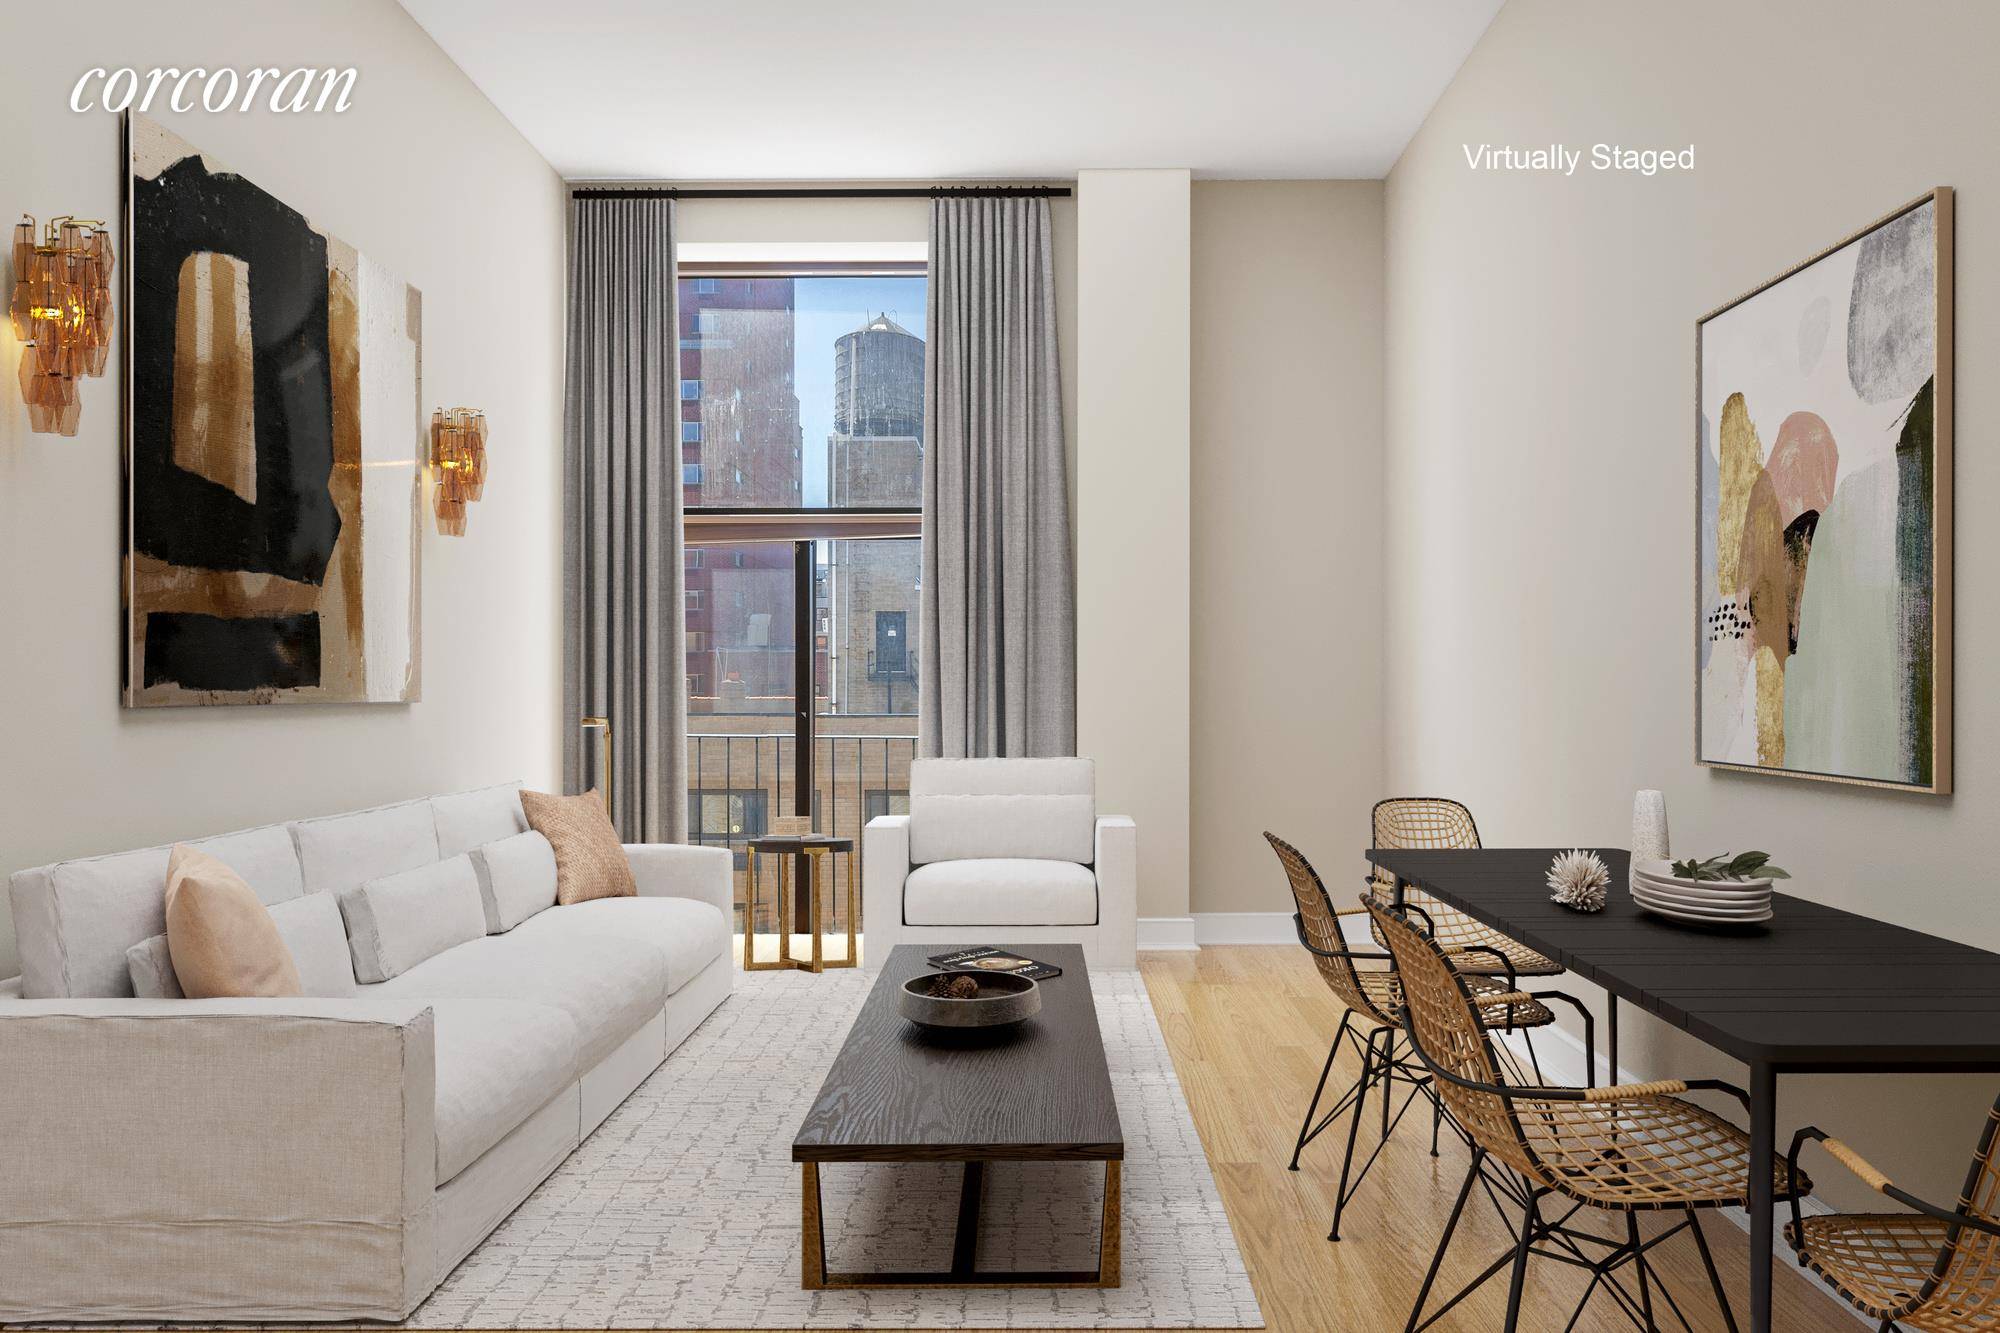 Loft living in Downtown Manhattan within walking distance to Gramercy Park, Flatiron, Chelsea and Midtown.